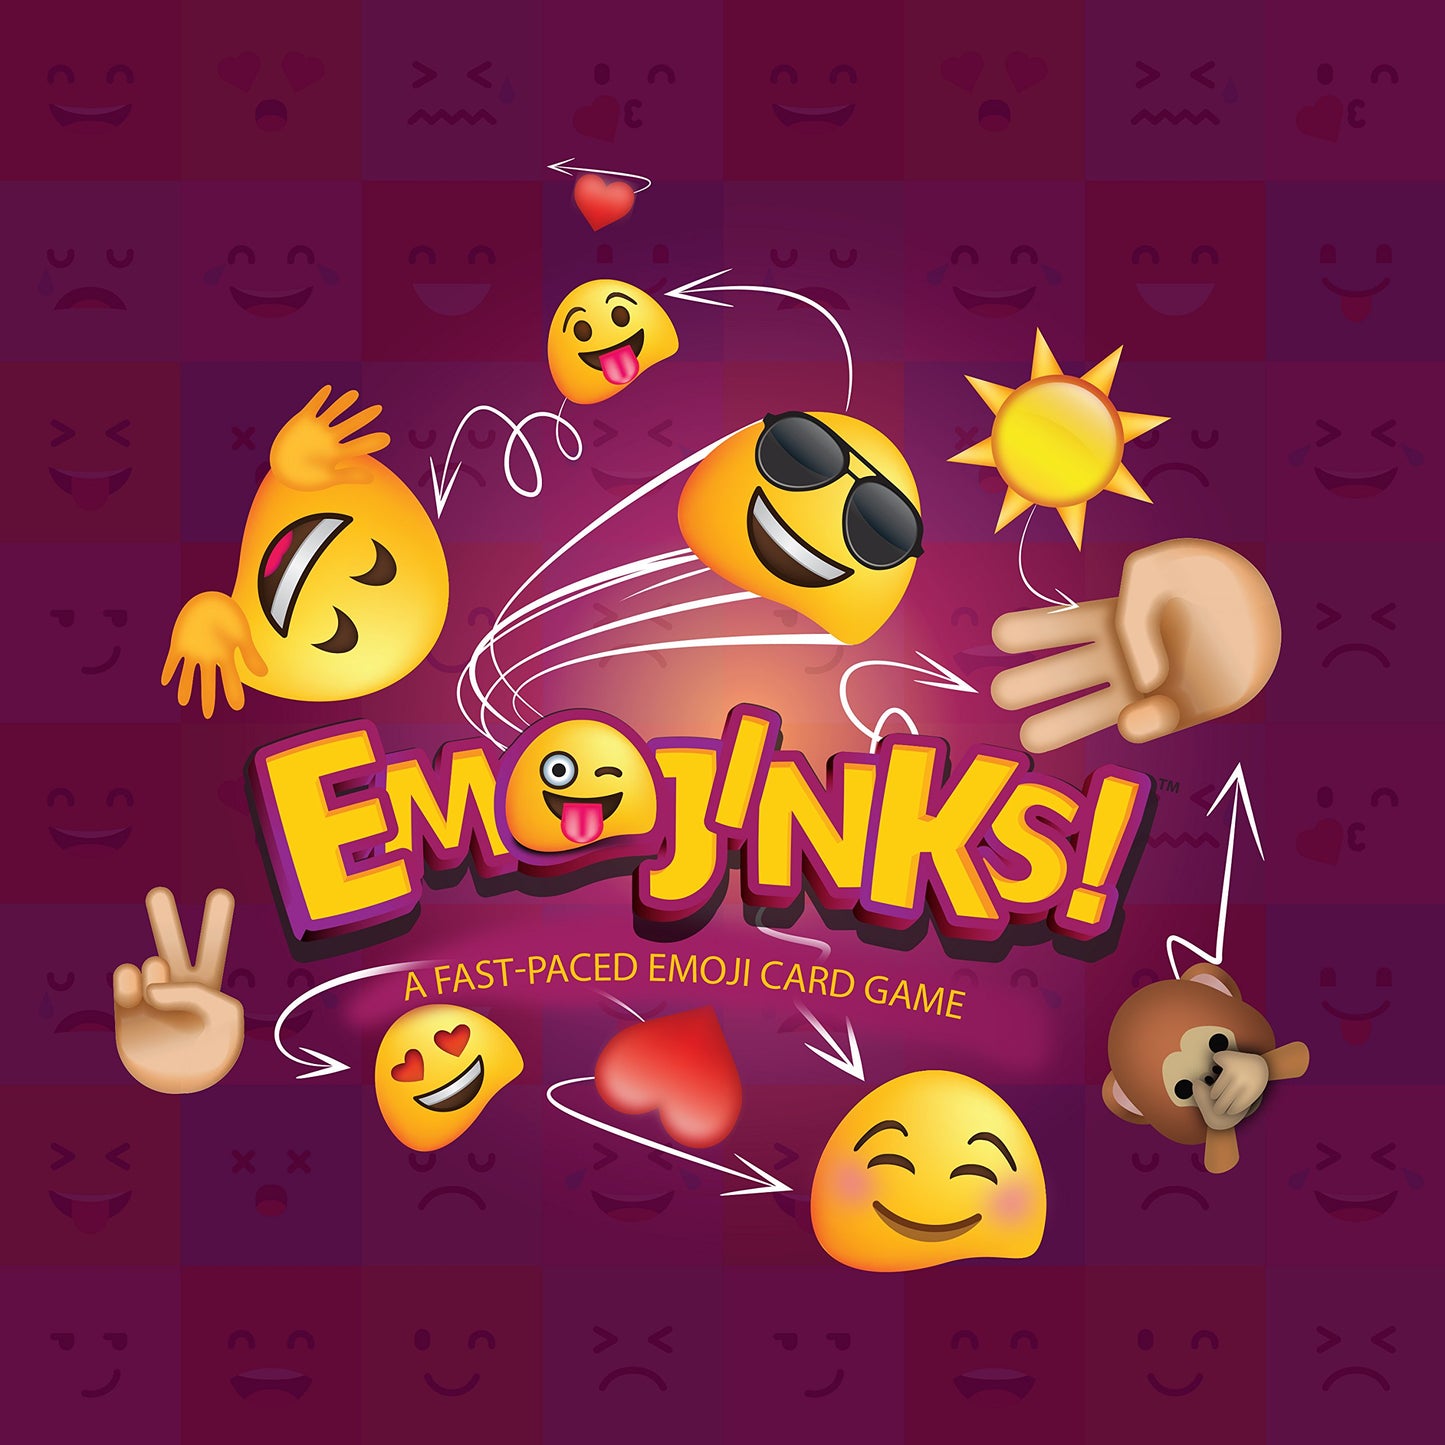 Emojinks Emoji Card Games For Families - Fun Card Game For kids Emoji Party Toys Gifts For Boys and Girls